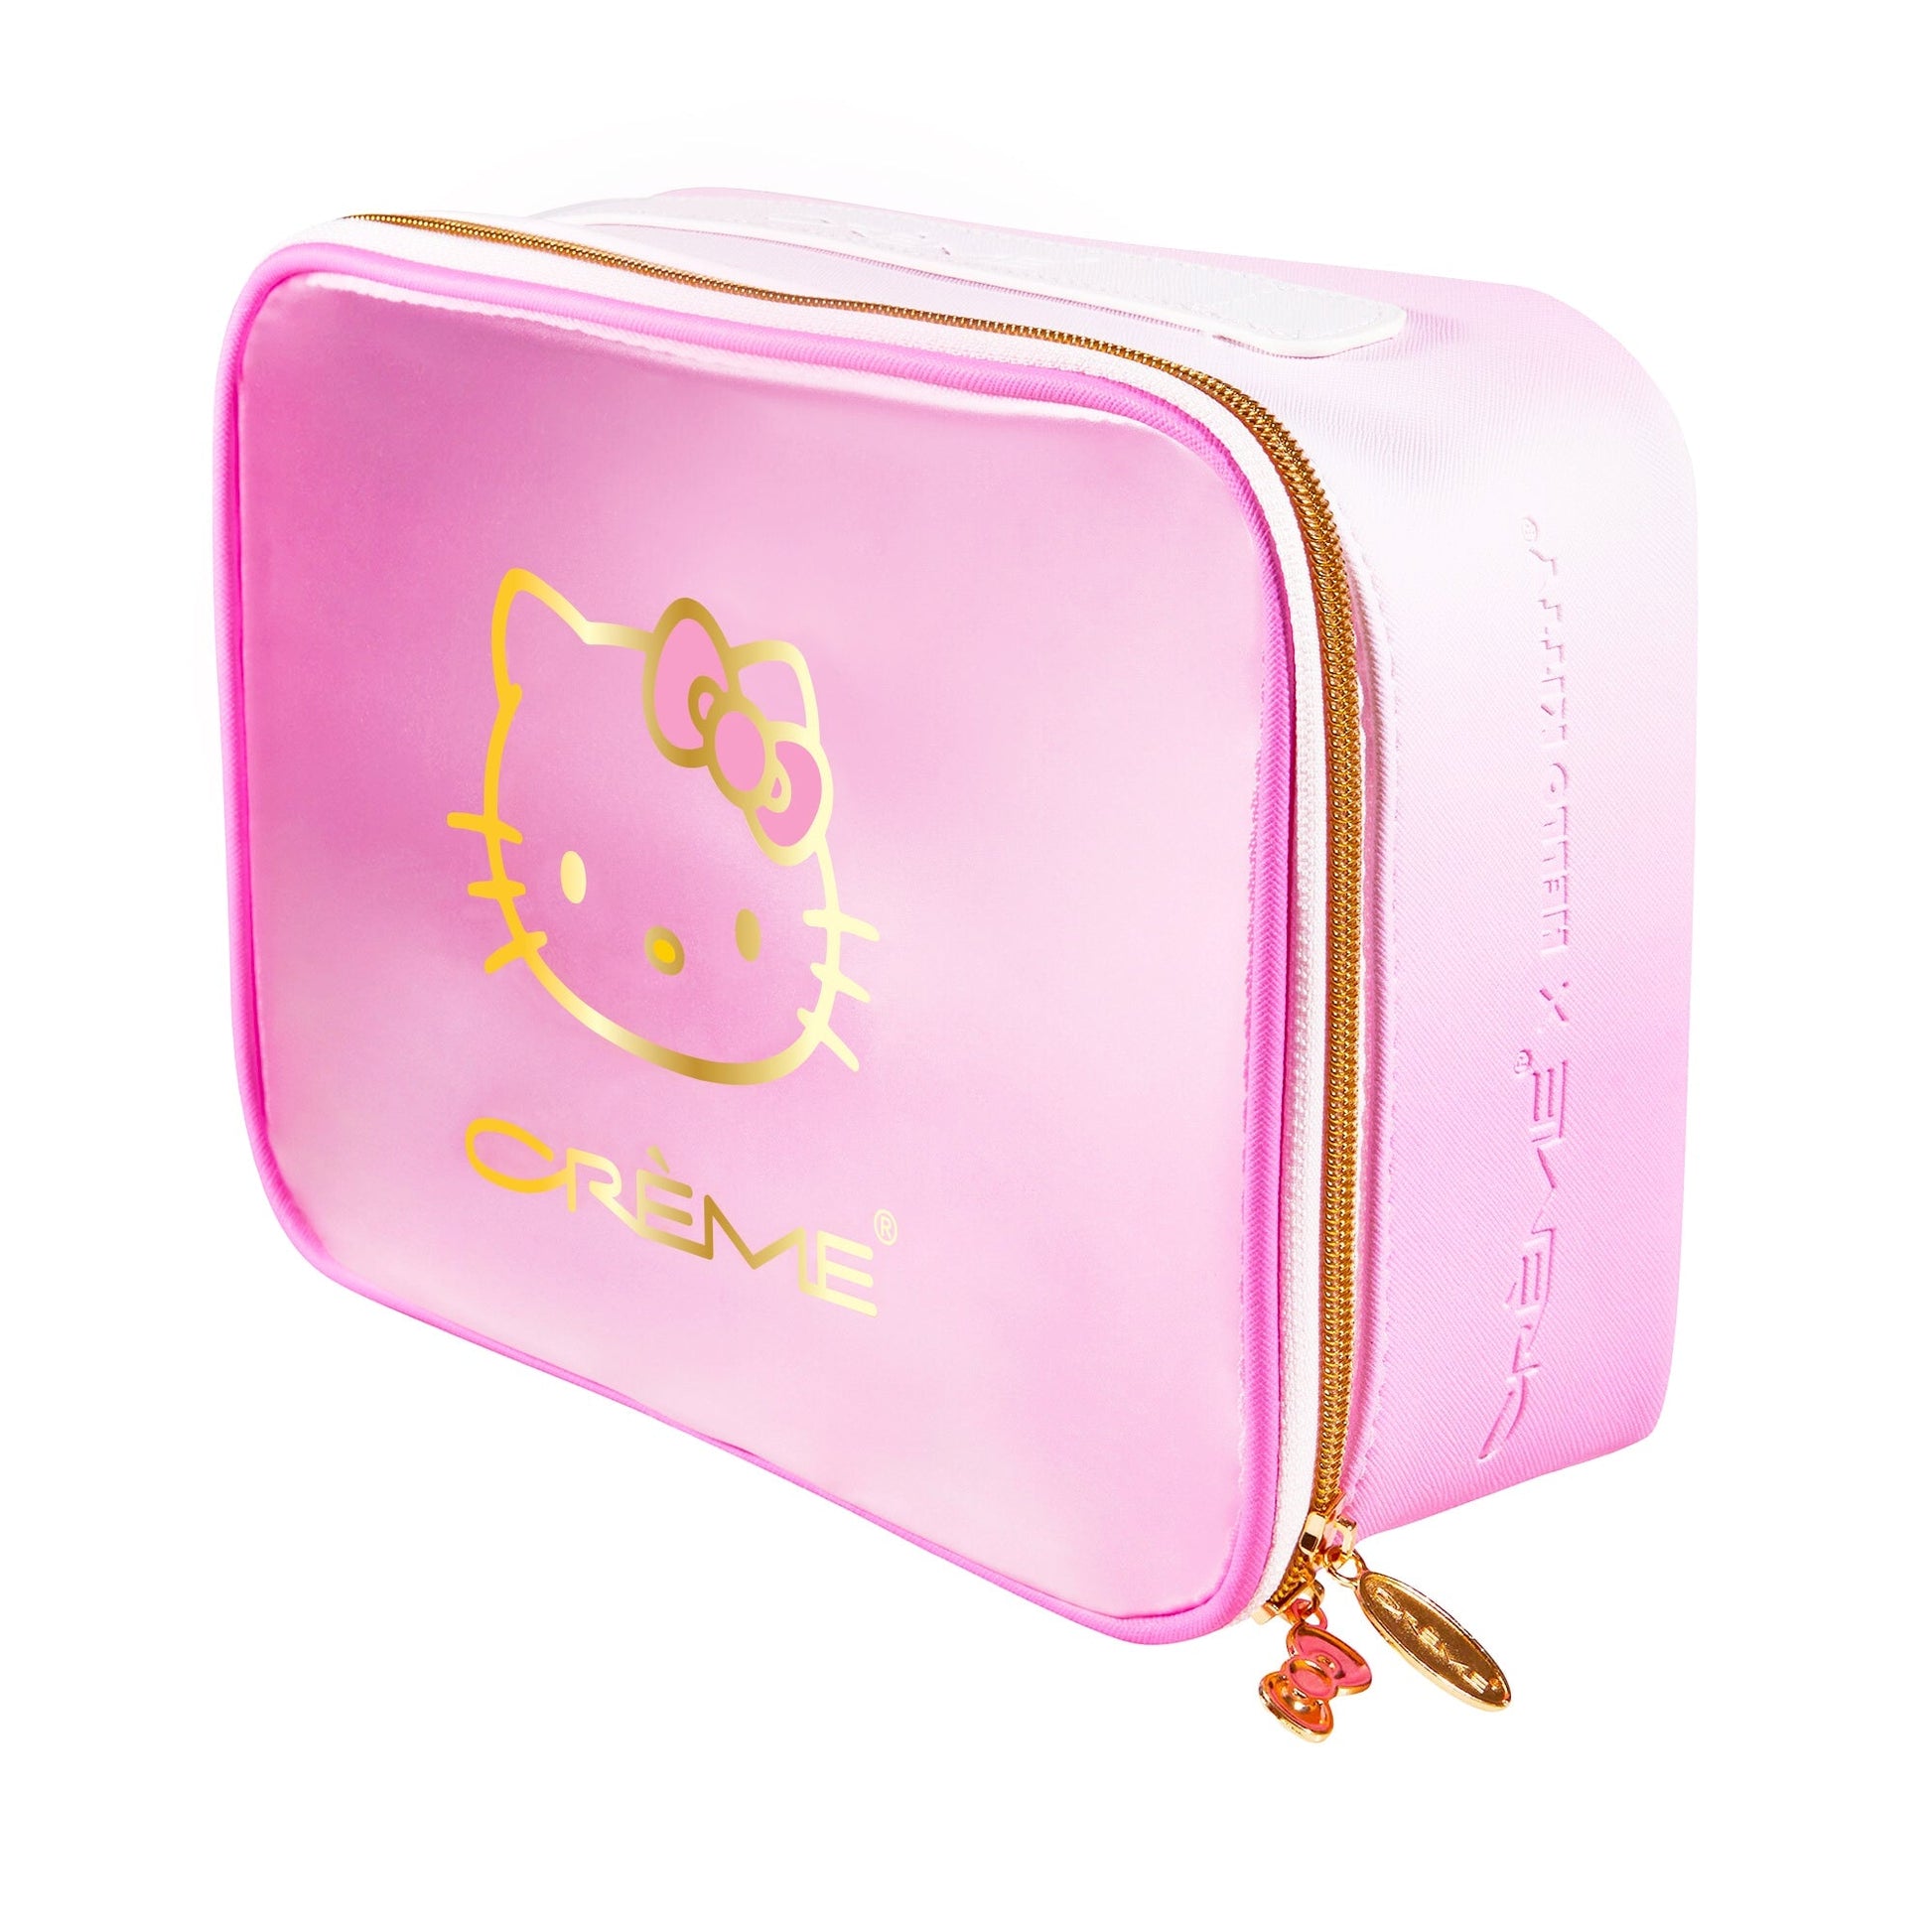 Hello Kitty Perfect Pink Travel Case